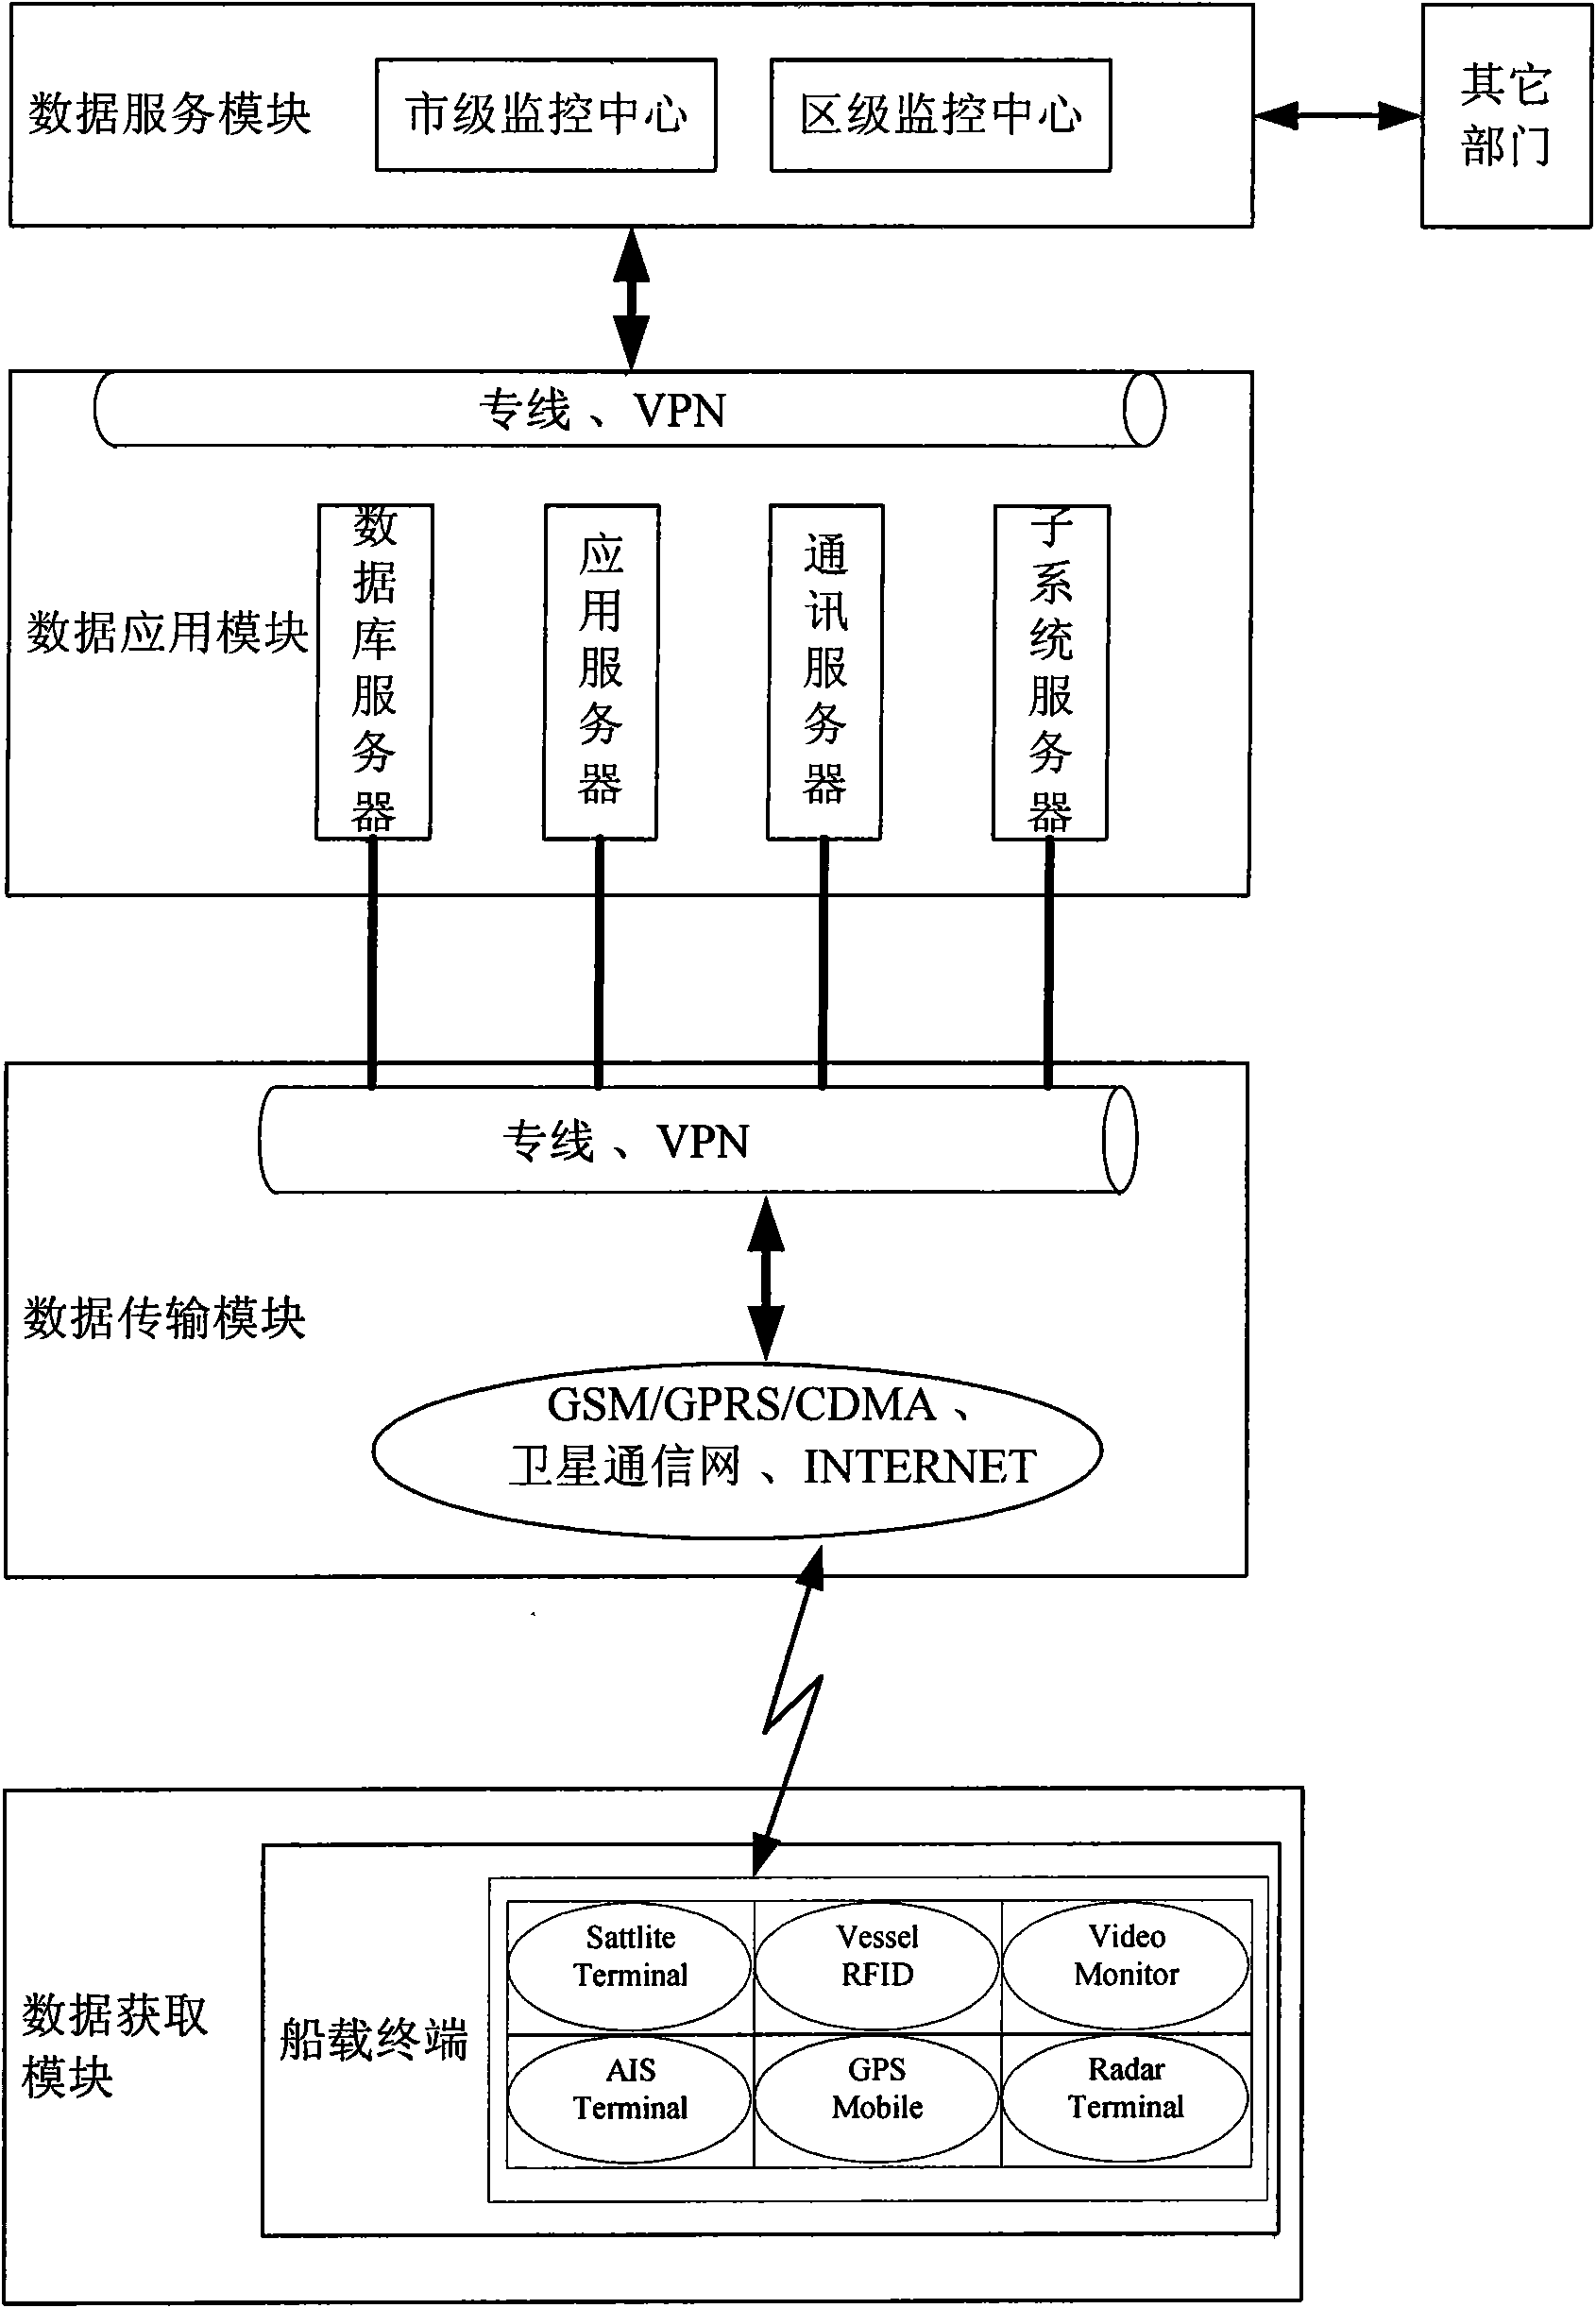 Ship rescue information system and realization method thereof